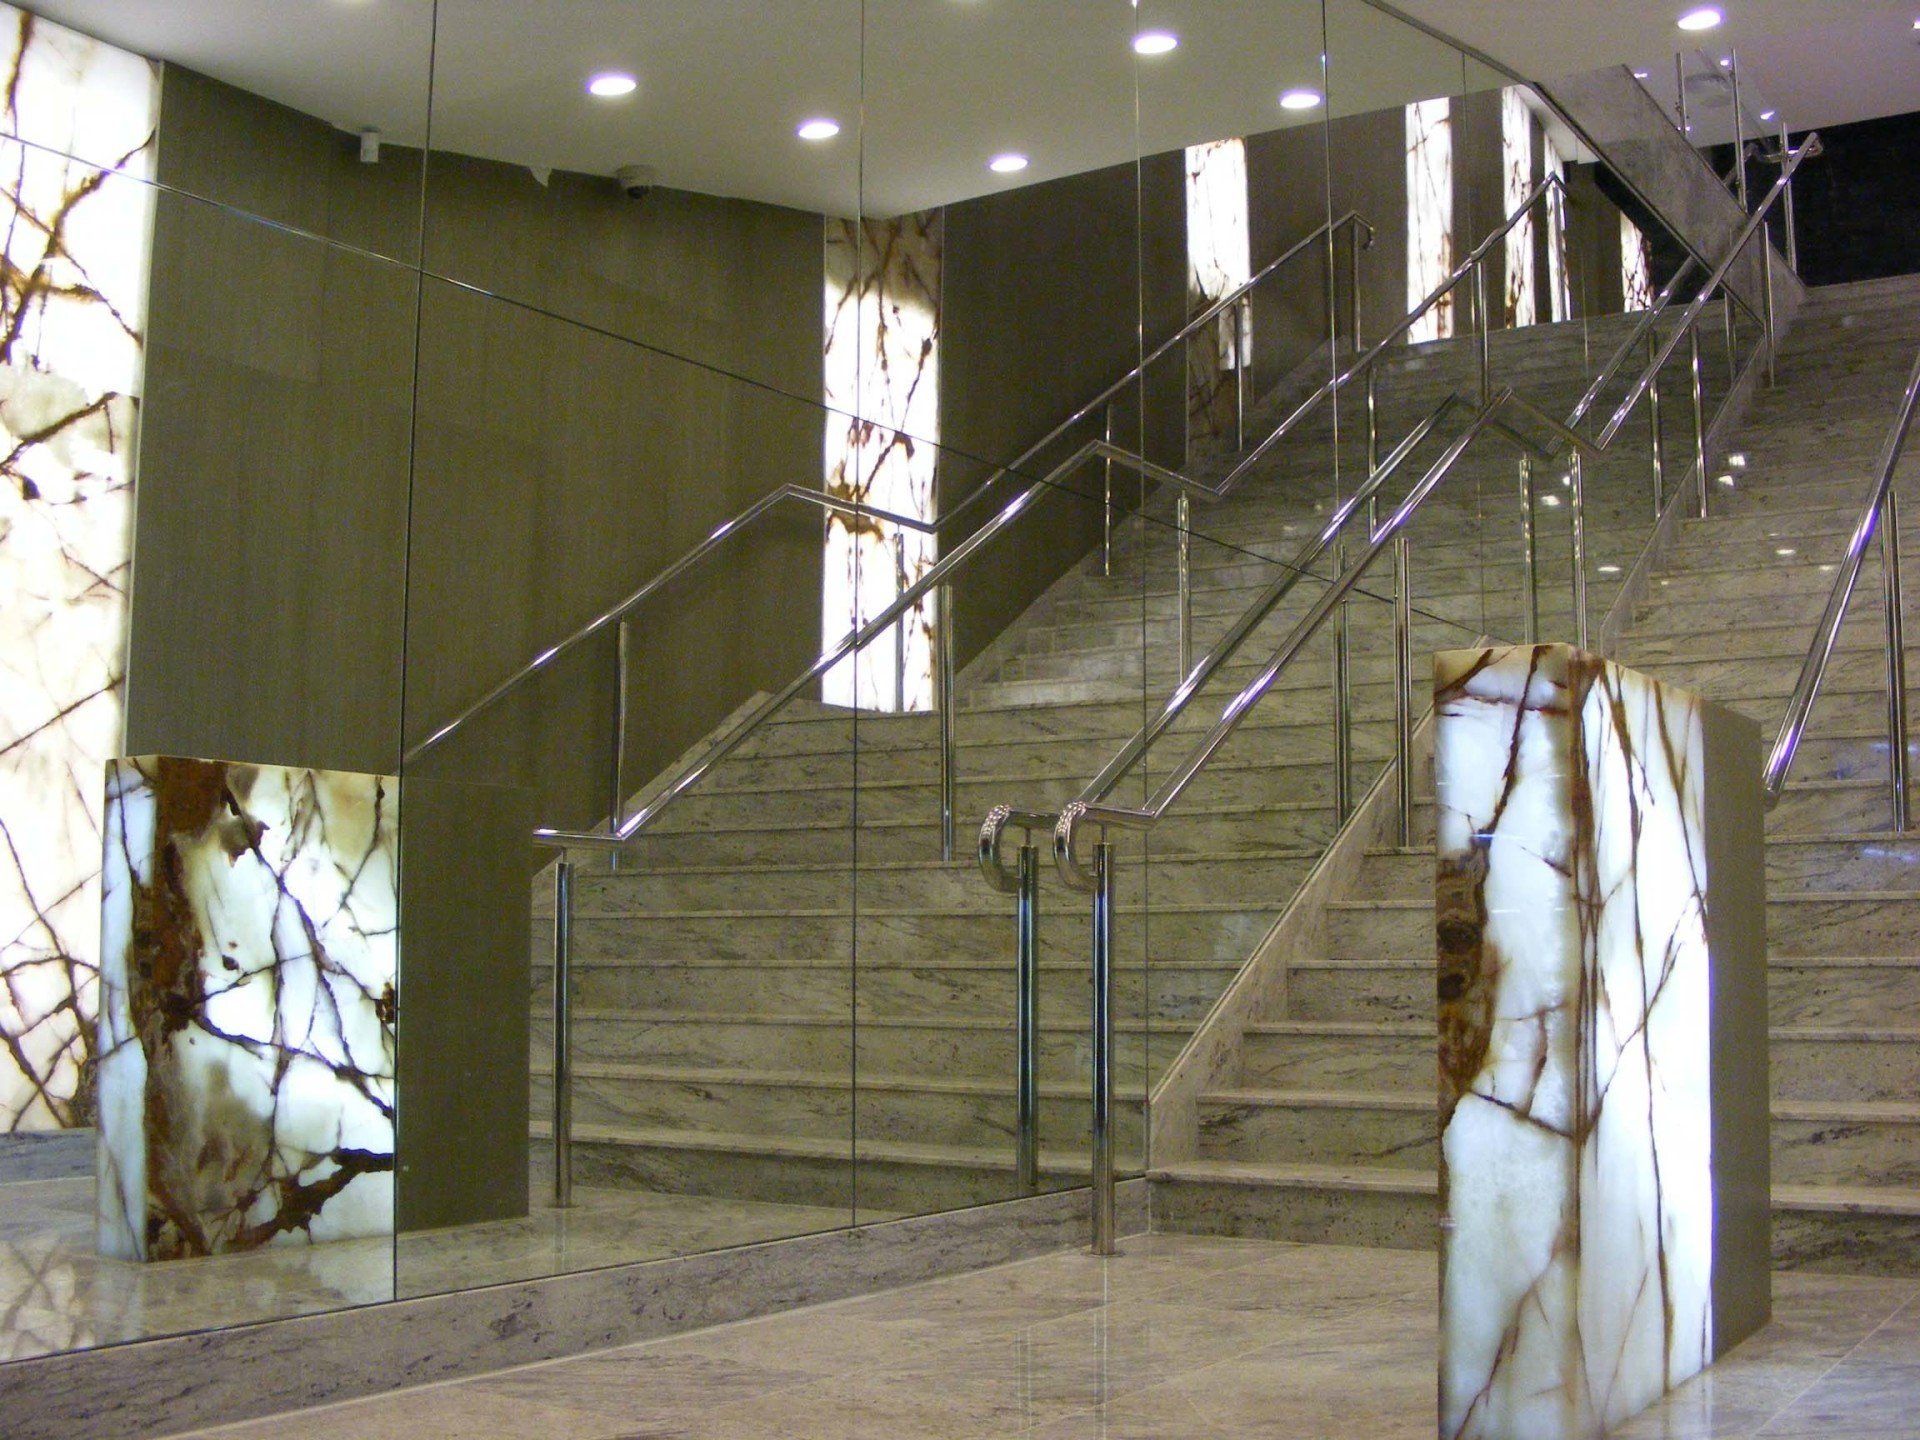 Another entrance to a modern reception centre